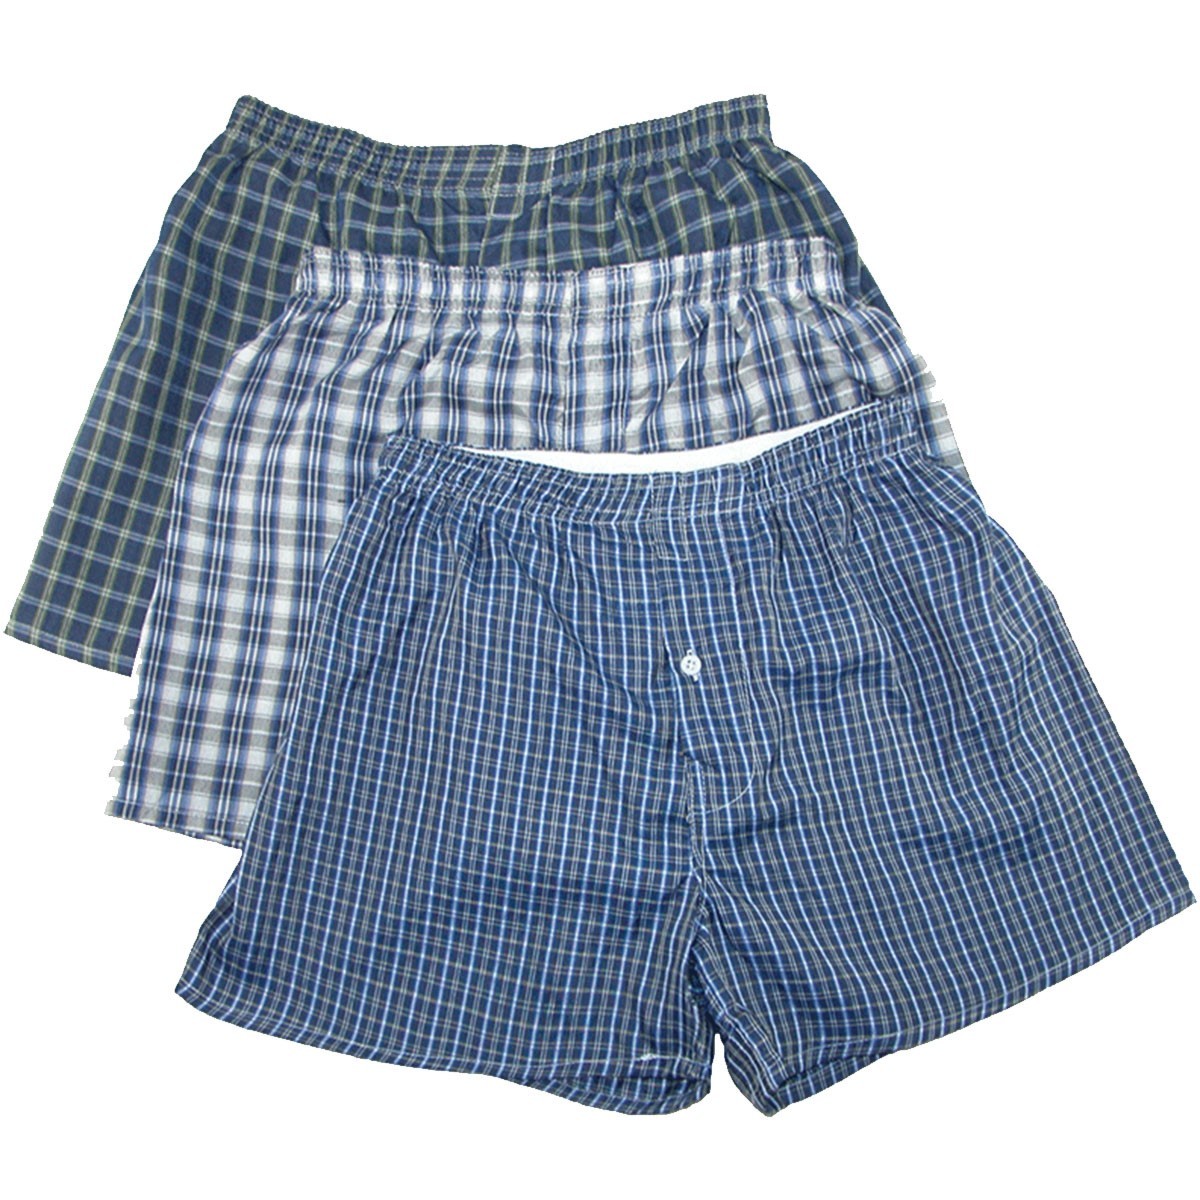 Wholesale Shorts now available at Wholesale Central - Items 1 - 40